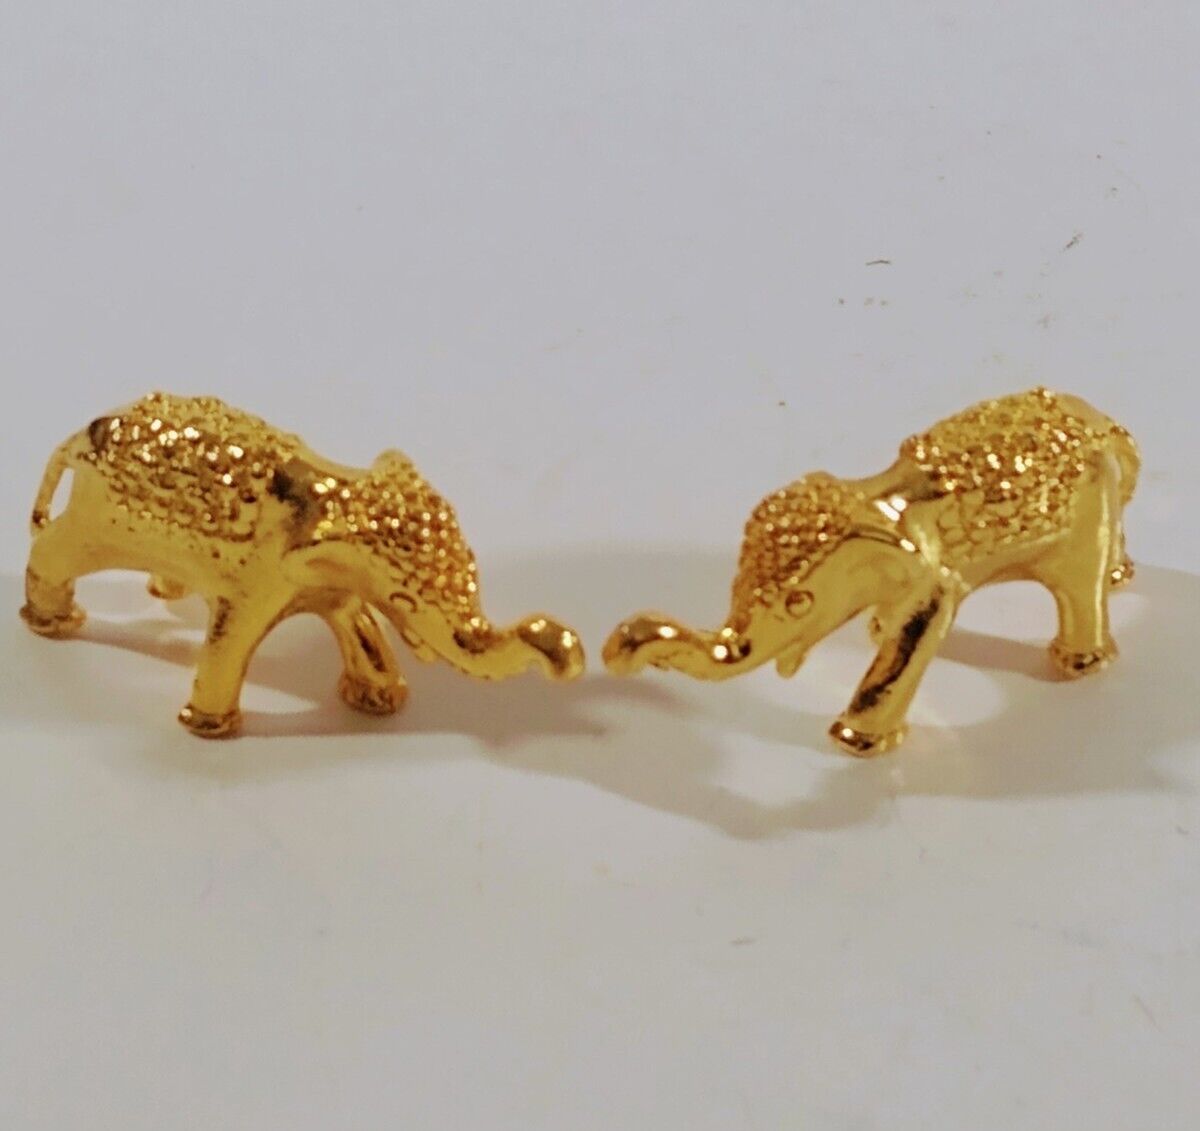 Two Small Gold Plated Metal Elephants Collectible Figurines